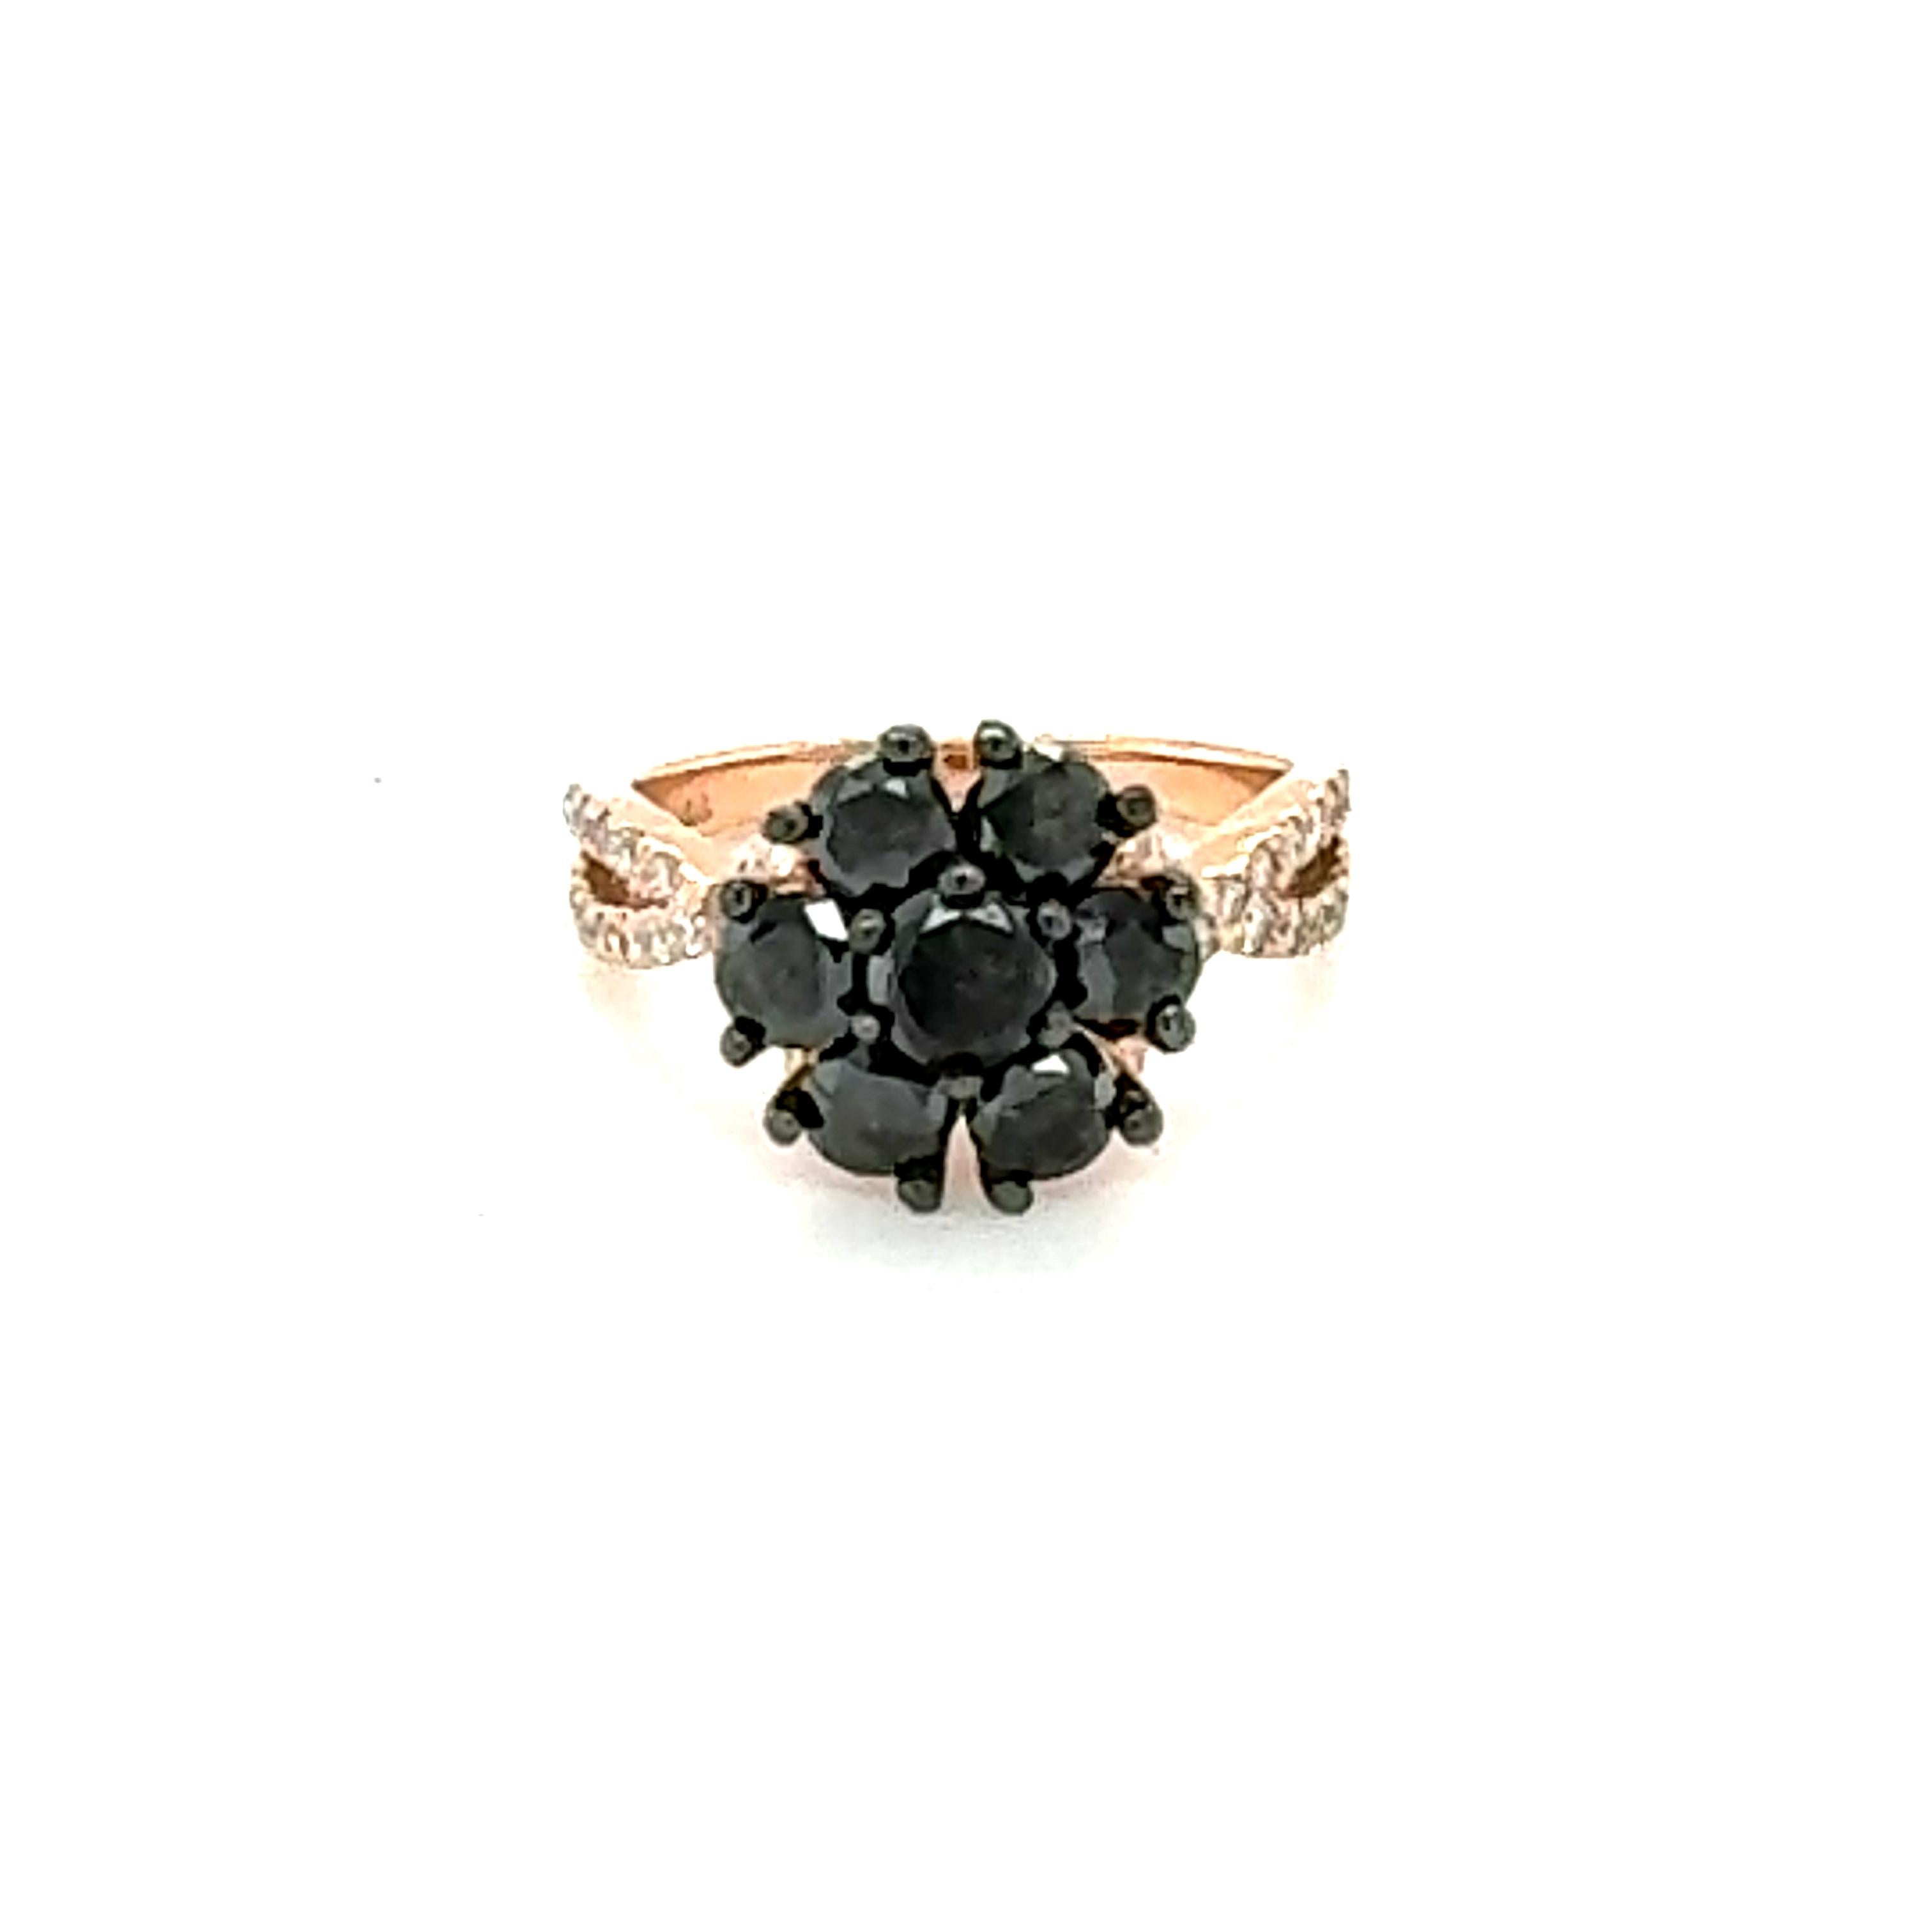 2.07 Carat Salt and Pepper Diamond Rose Gold Ring

Beautiful Black and White Diamond Floret Design statement ring.  
This is a great ring at a very affordable price point for anyone that is on a budget and wants something different and edgy for an